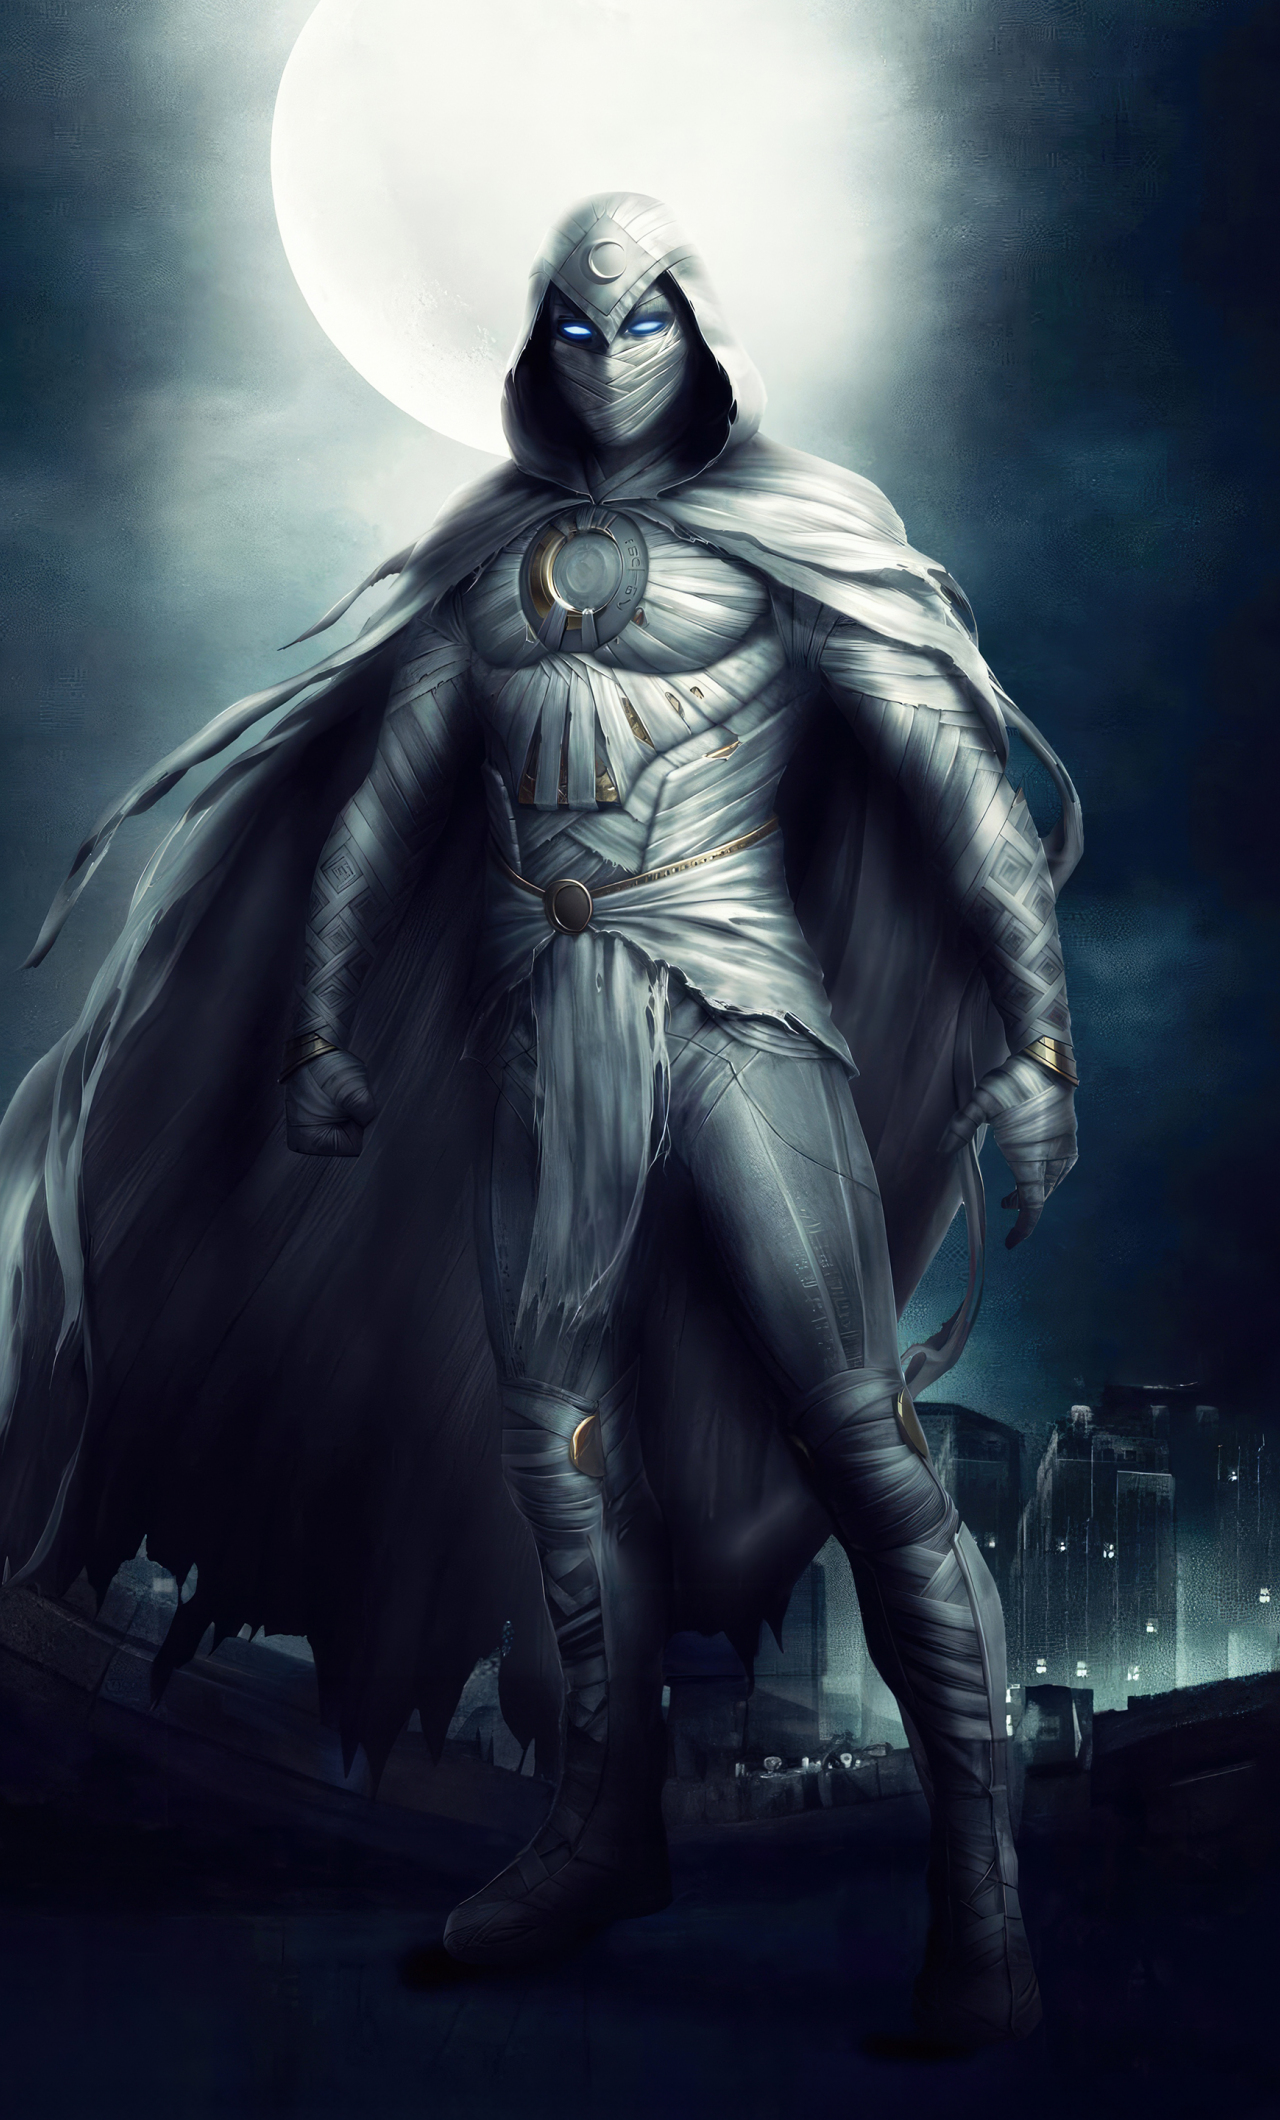 Marvel Moon Knight Art Wallpapers - Marvel Wallpapers for iPhone